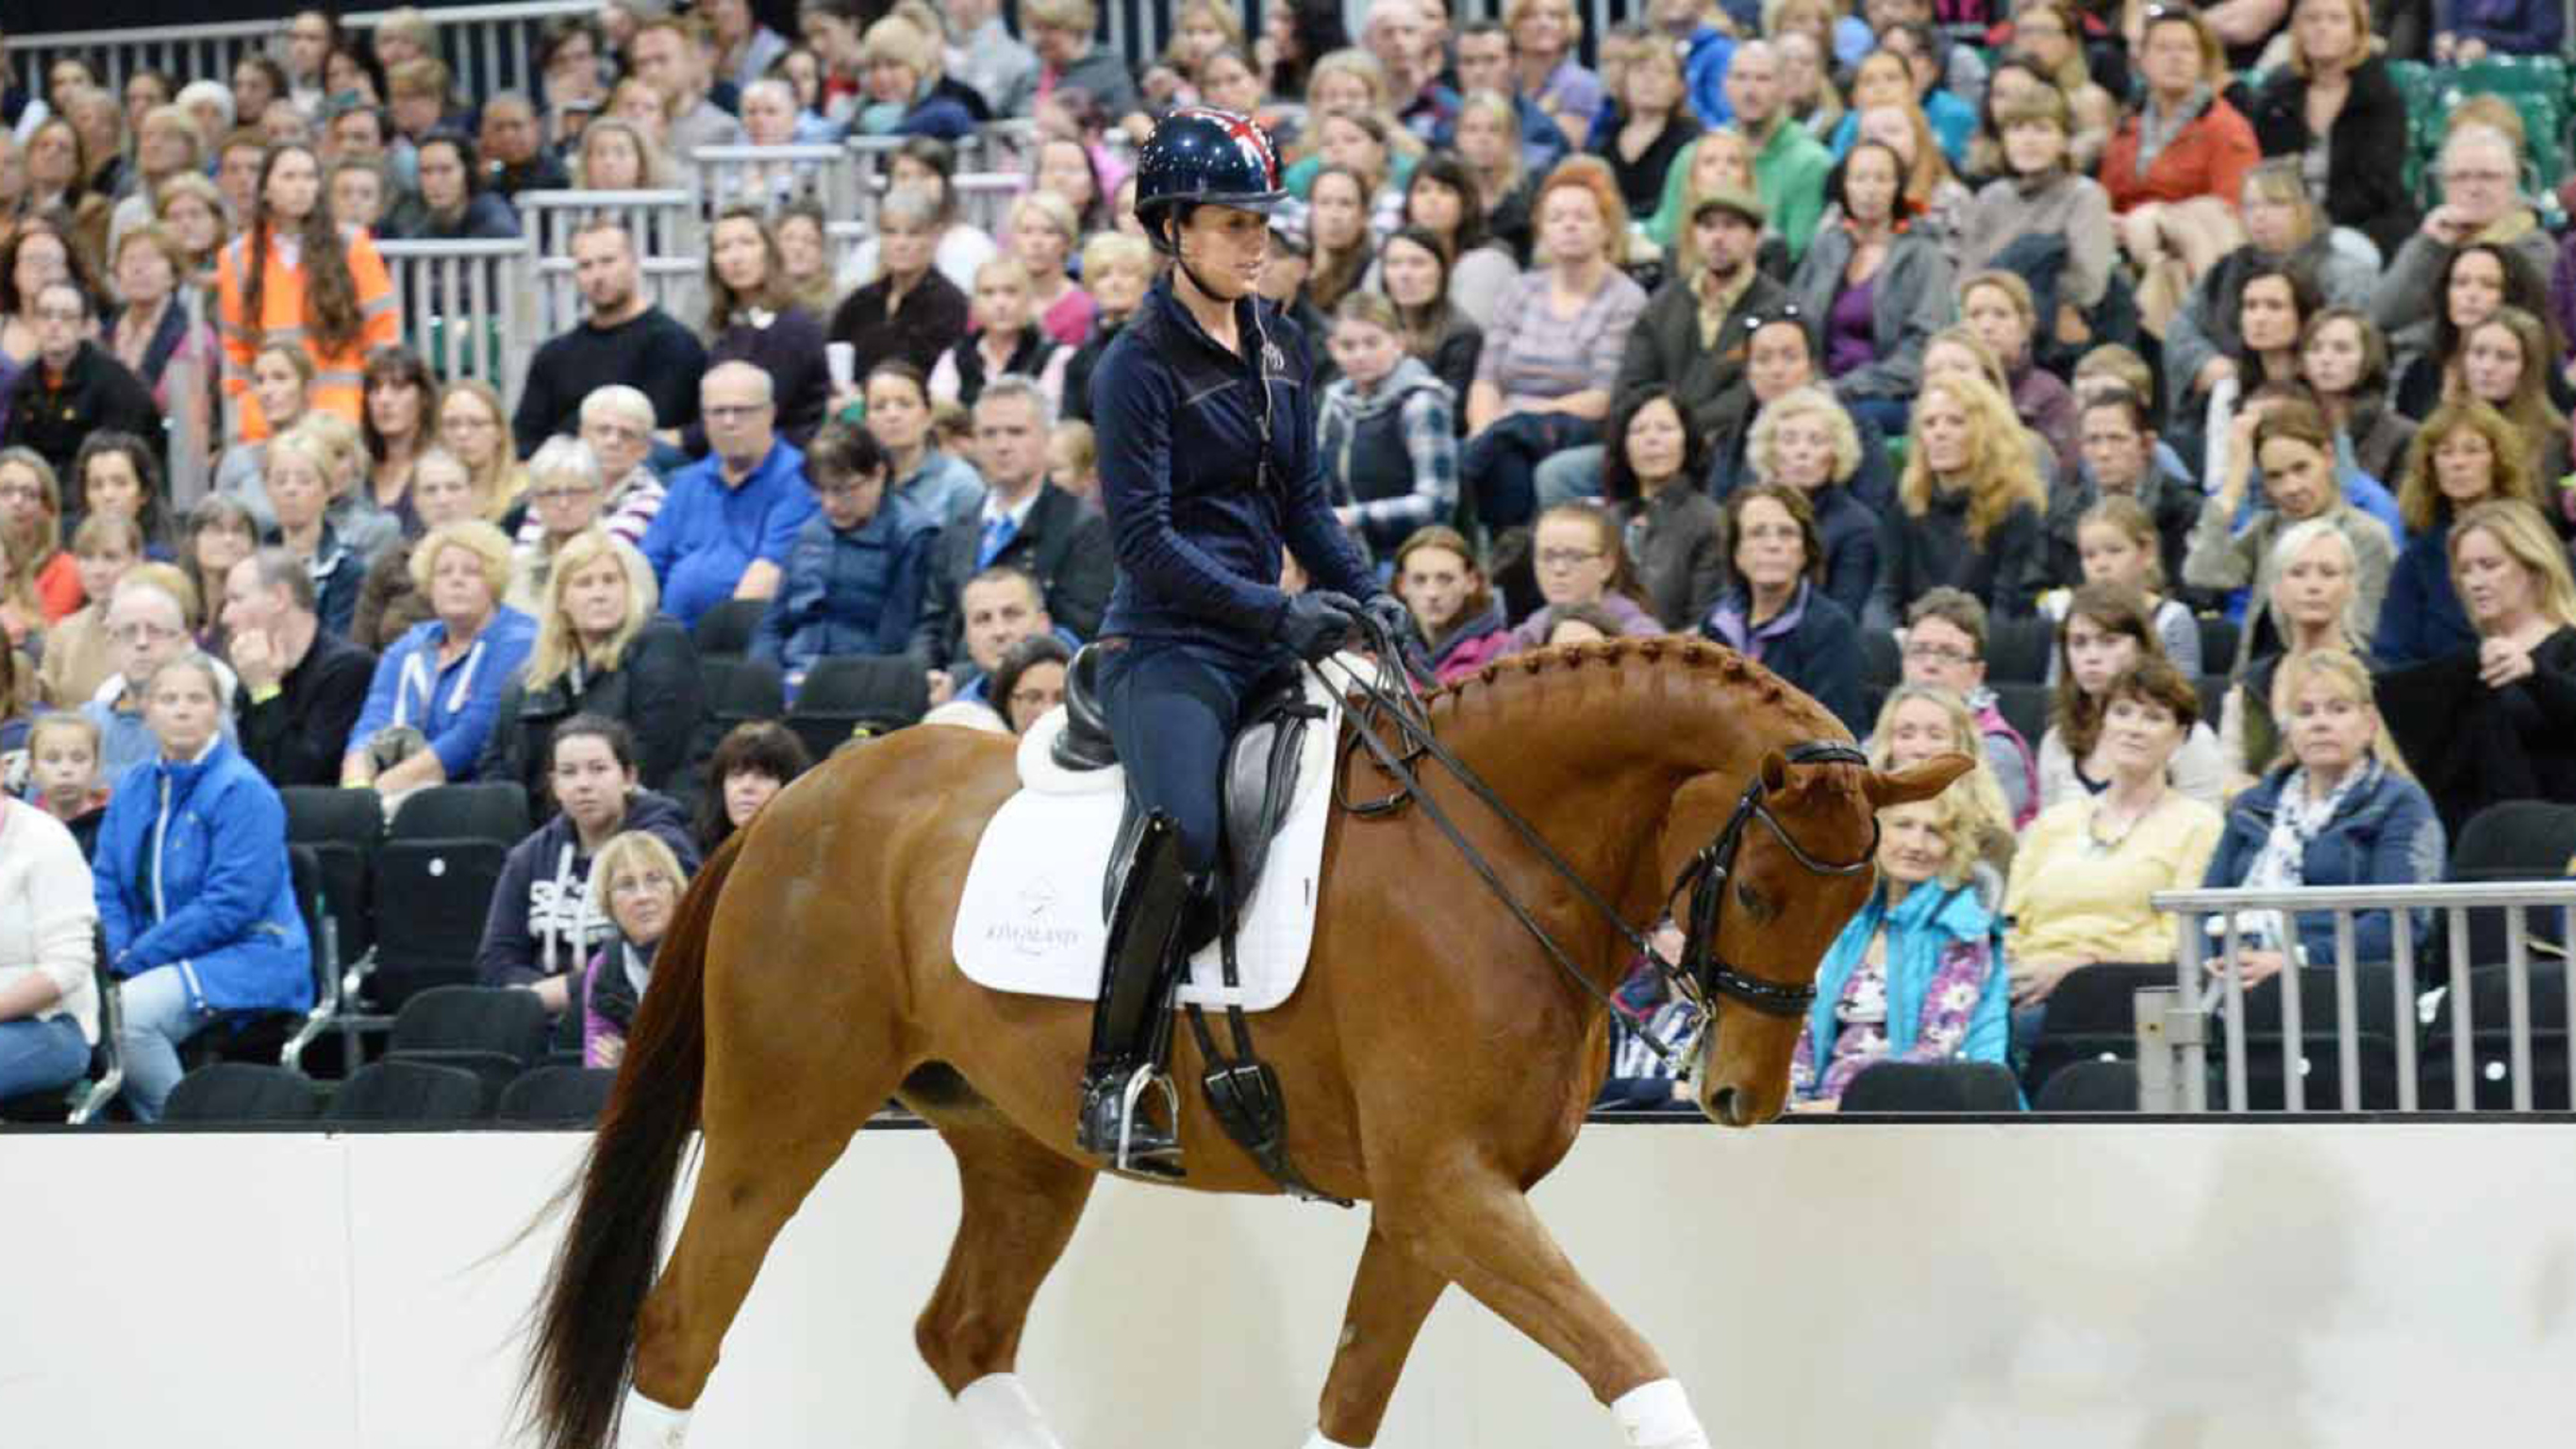 Your Horse Live 2018: Learn from the Experts